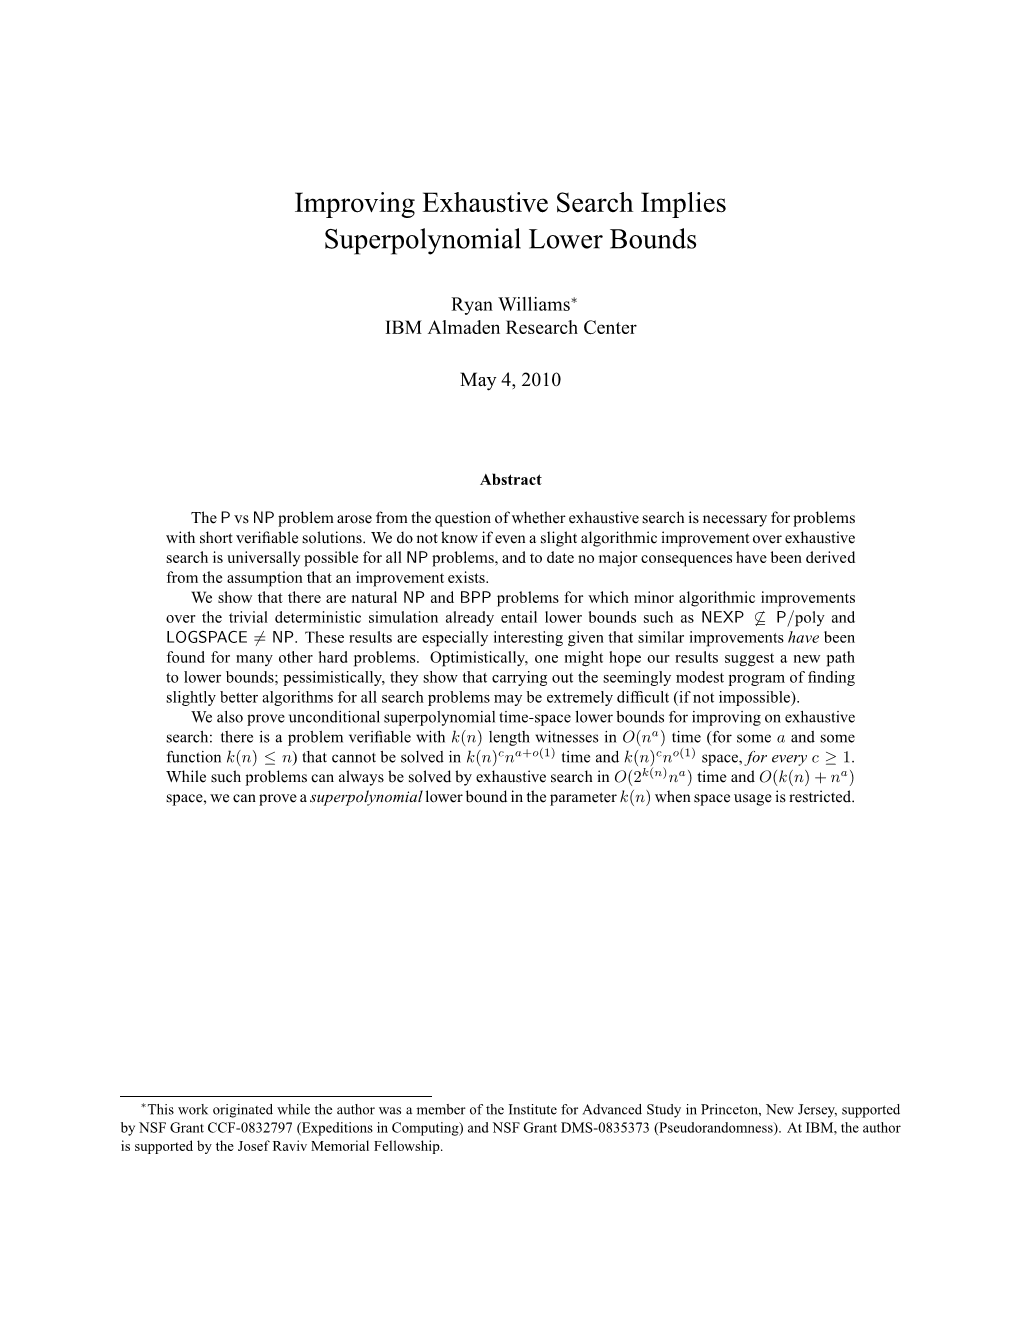 Improving Exhaustive Search Implies Superpolynomial Lower Bounds